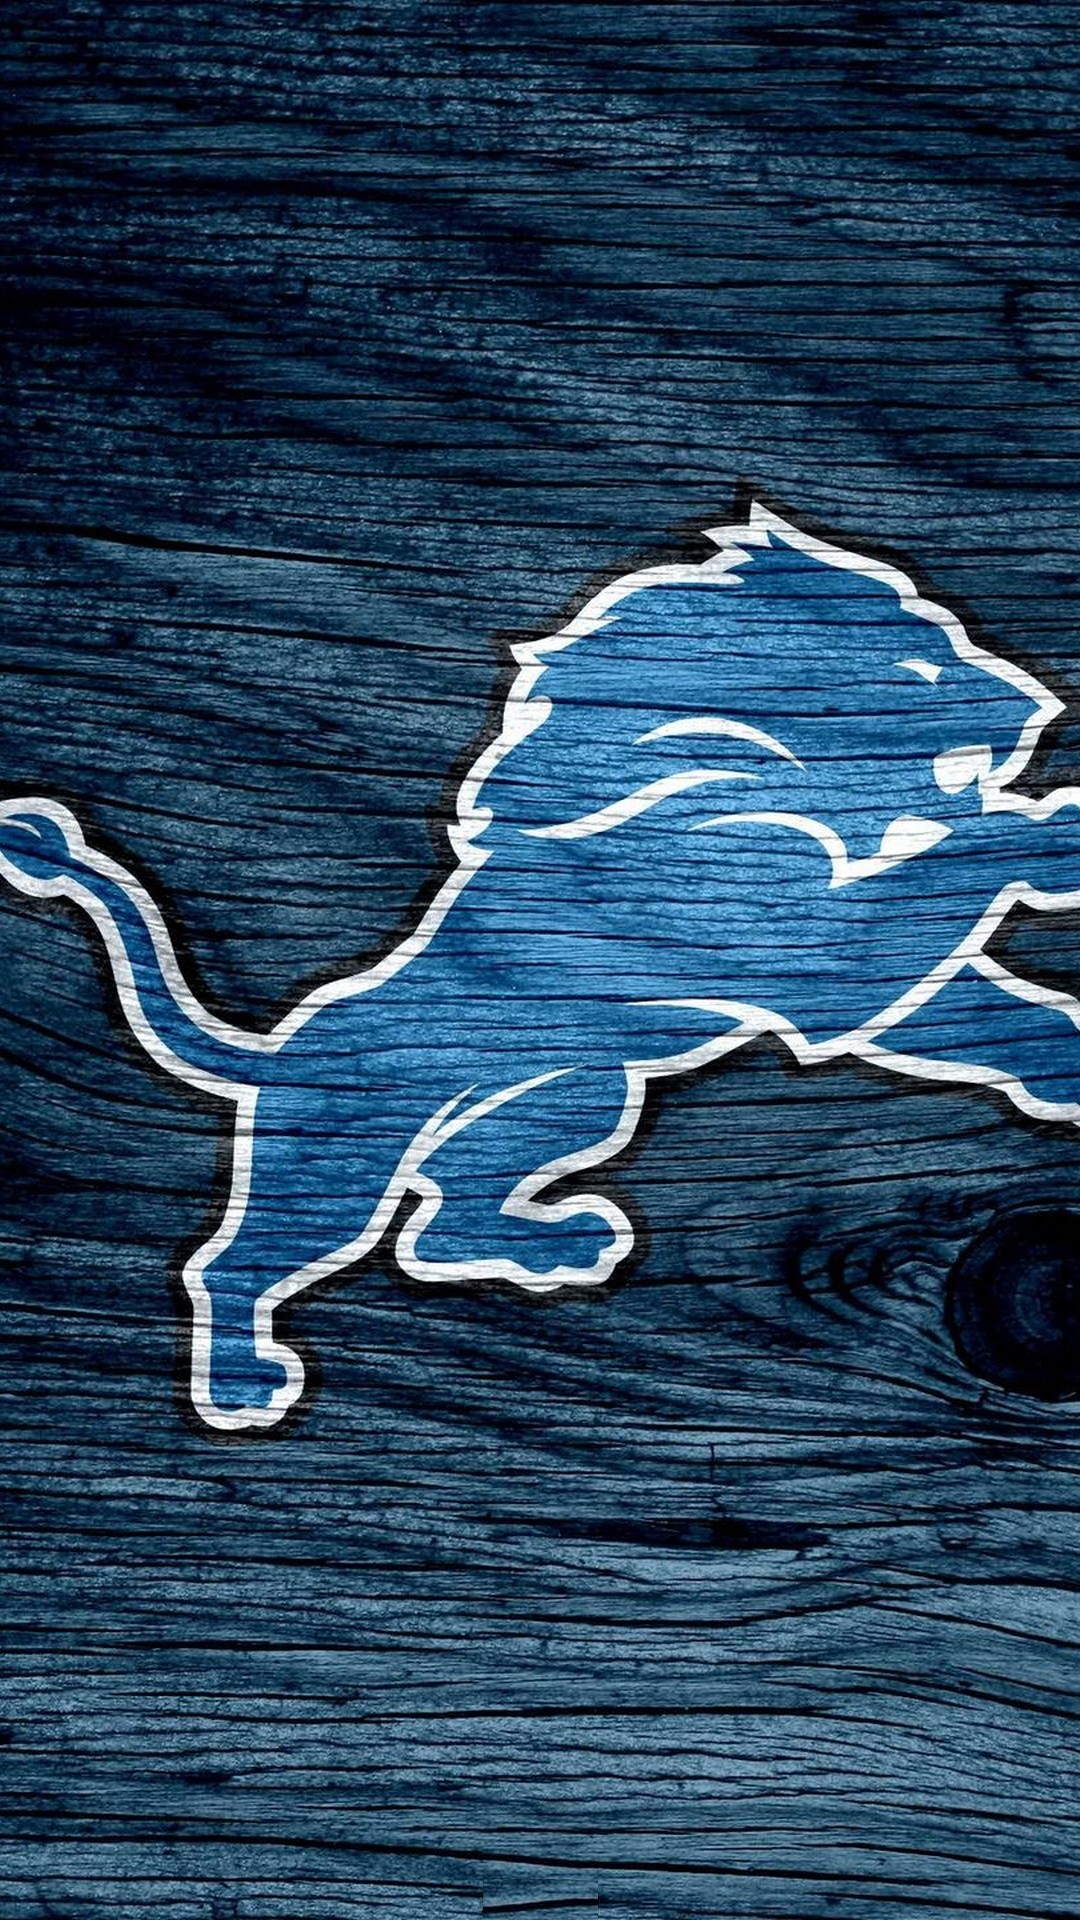 Detroit Lions Iphone Wallpaper Lock Screen With High-resolution - Detroit Lions Pride - HD Wallpaper 